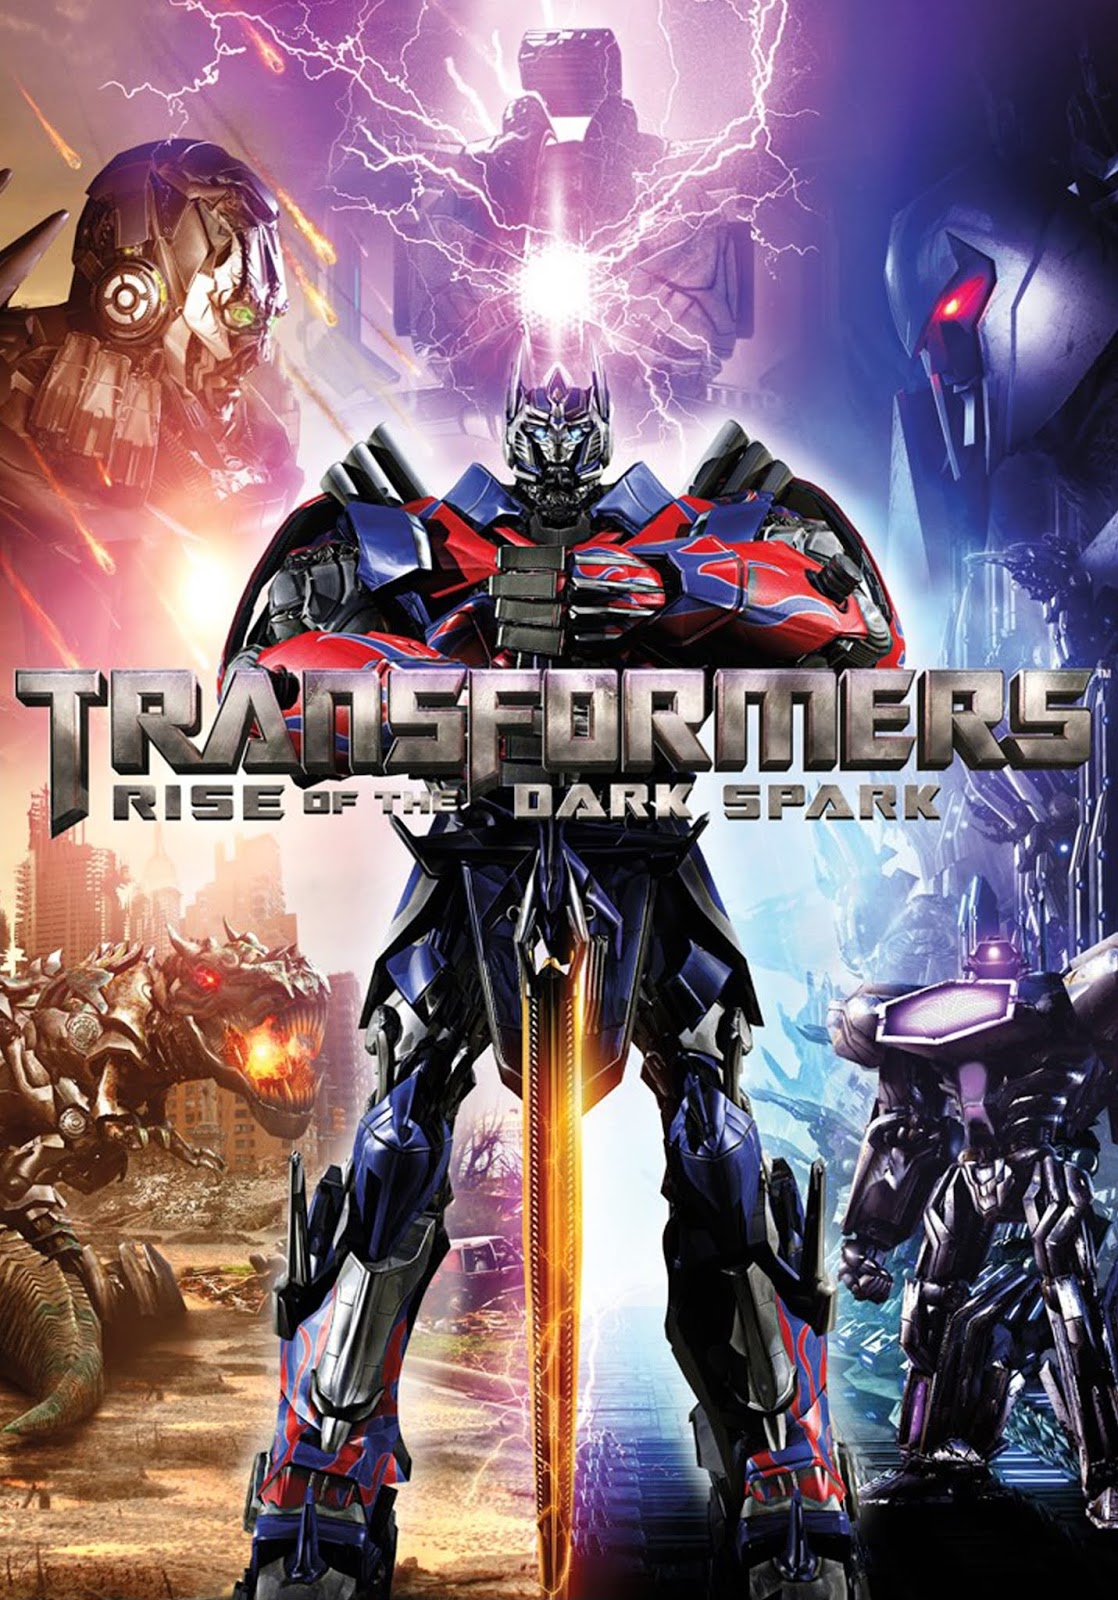 Transformers rise of the dark spark steam фото 12